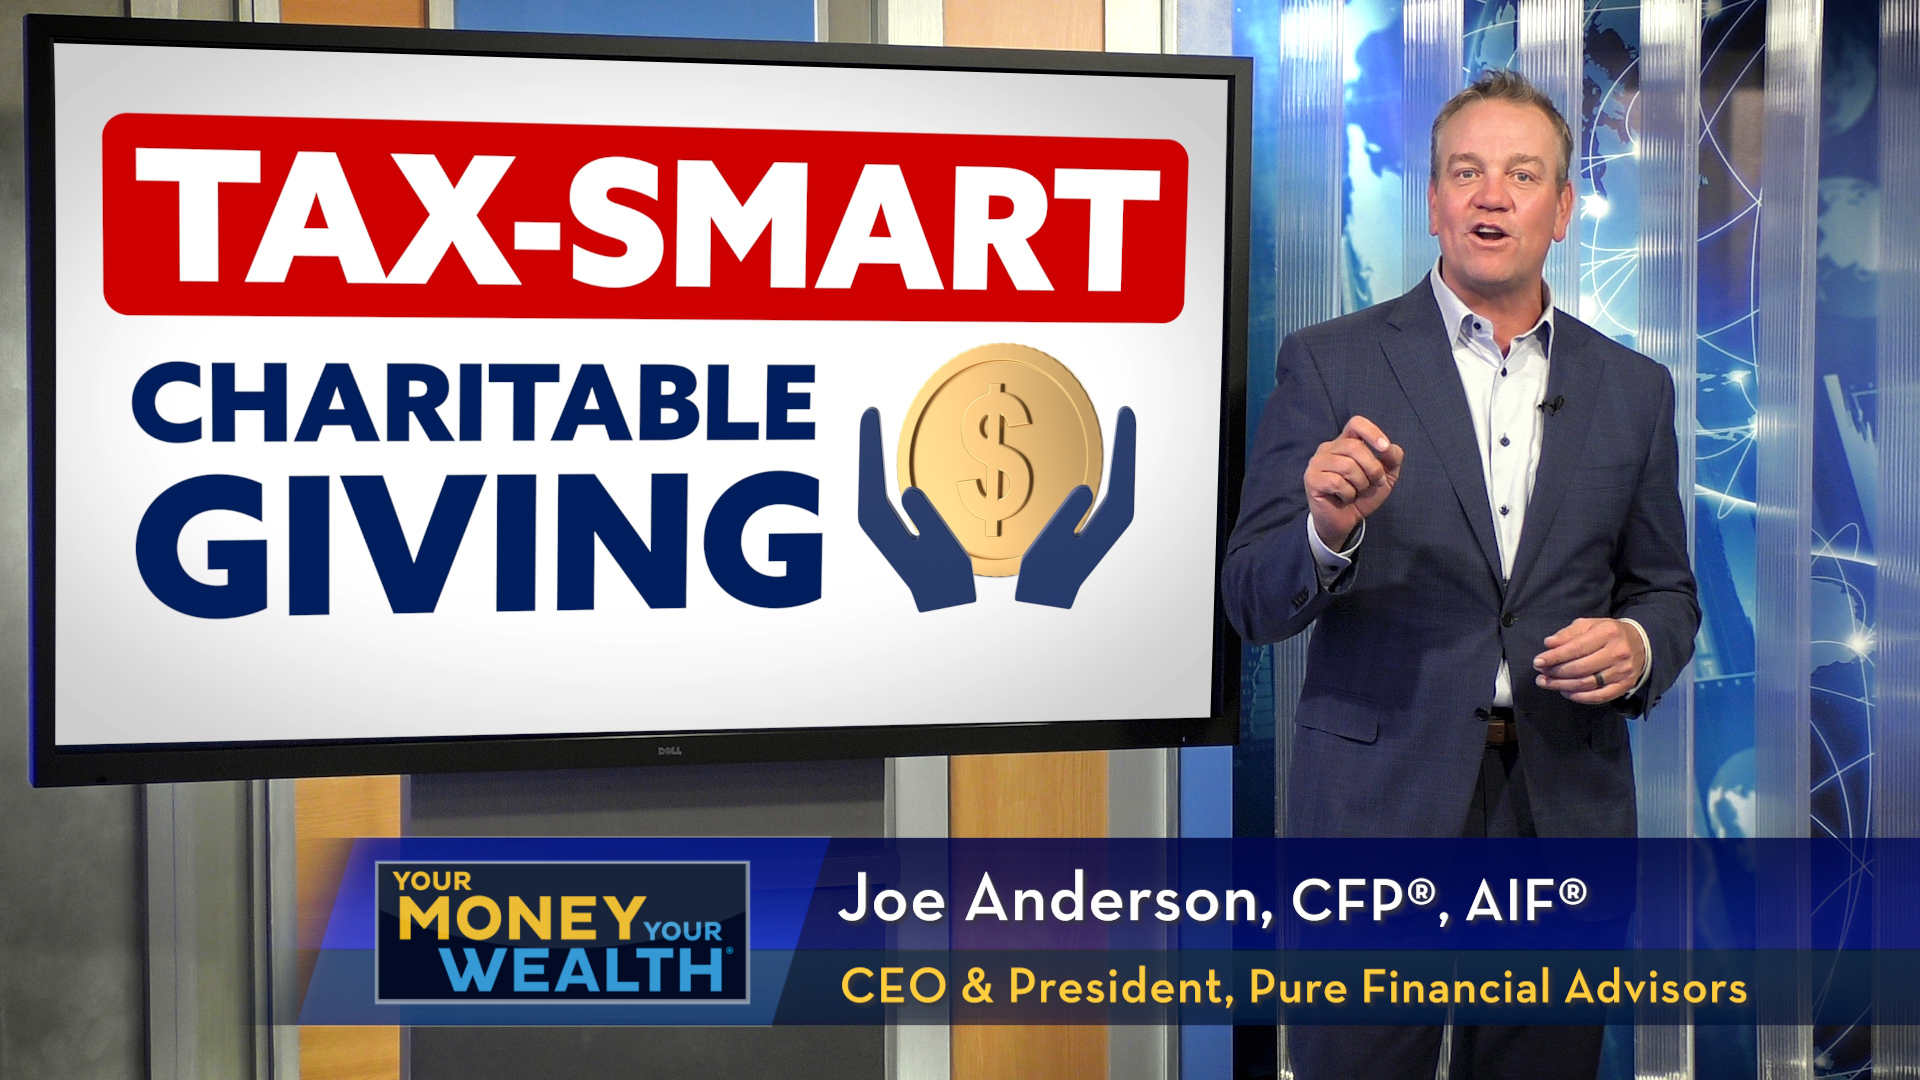 6 Secrets to Bigger Tax Savings From Your Nonprofit Donations - Your Money, Your Wealth® TV S9 | E12